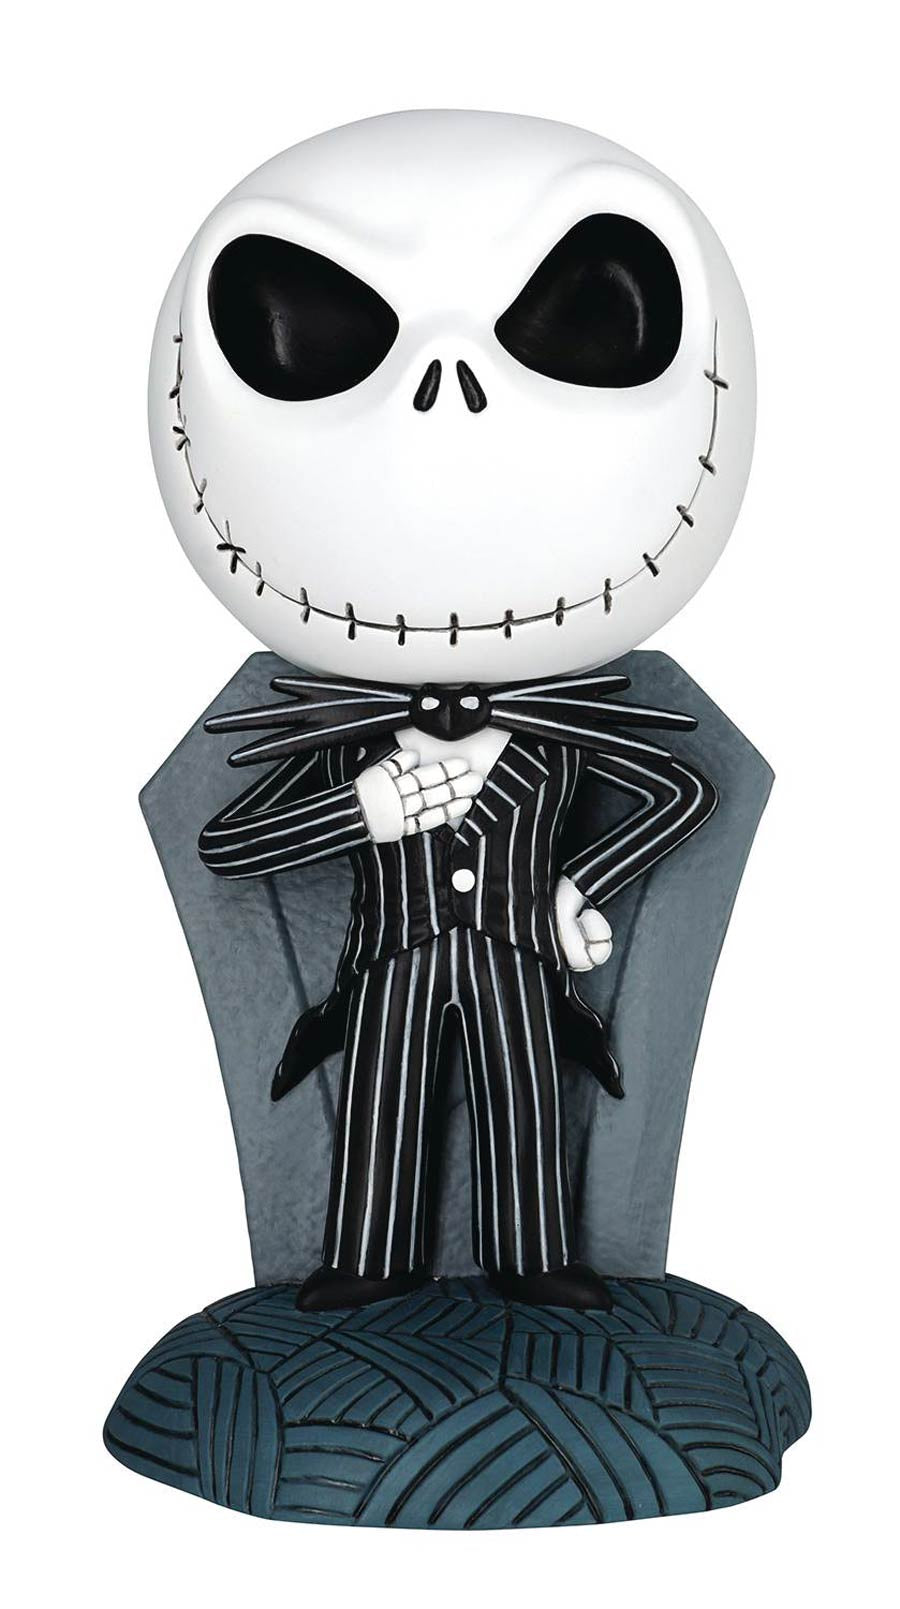 Nightmare Before Christmas - PVC Figural Coin Bank Figurine - Jack